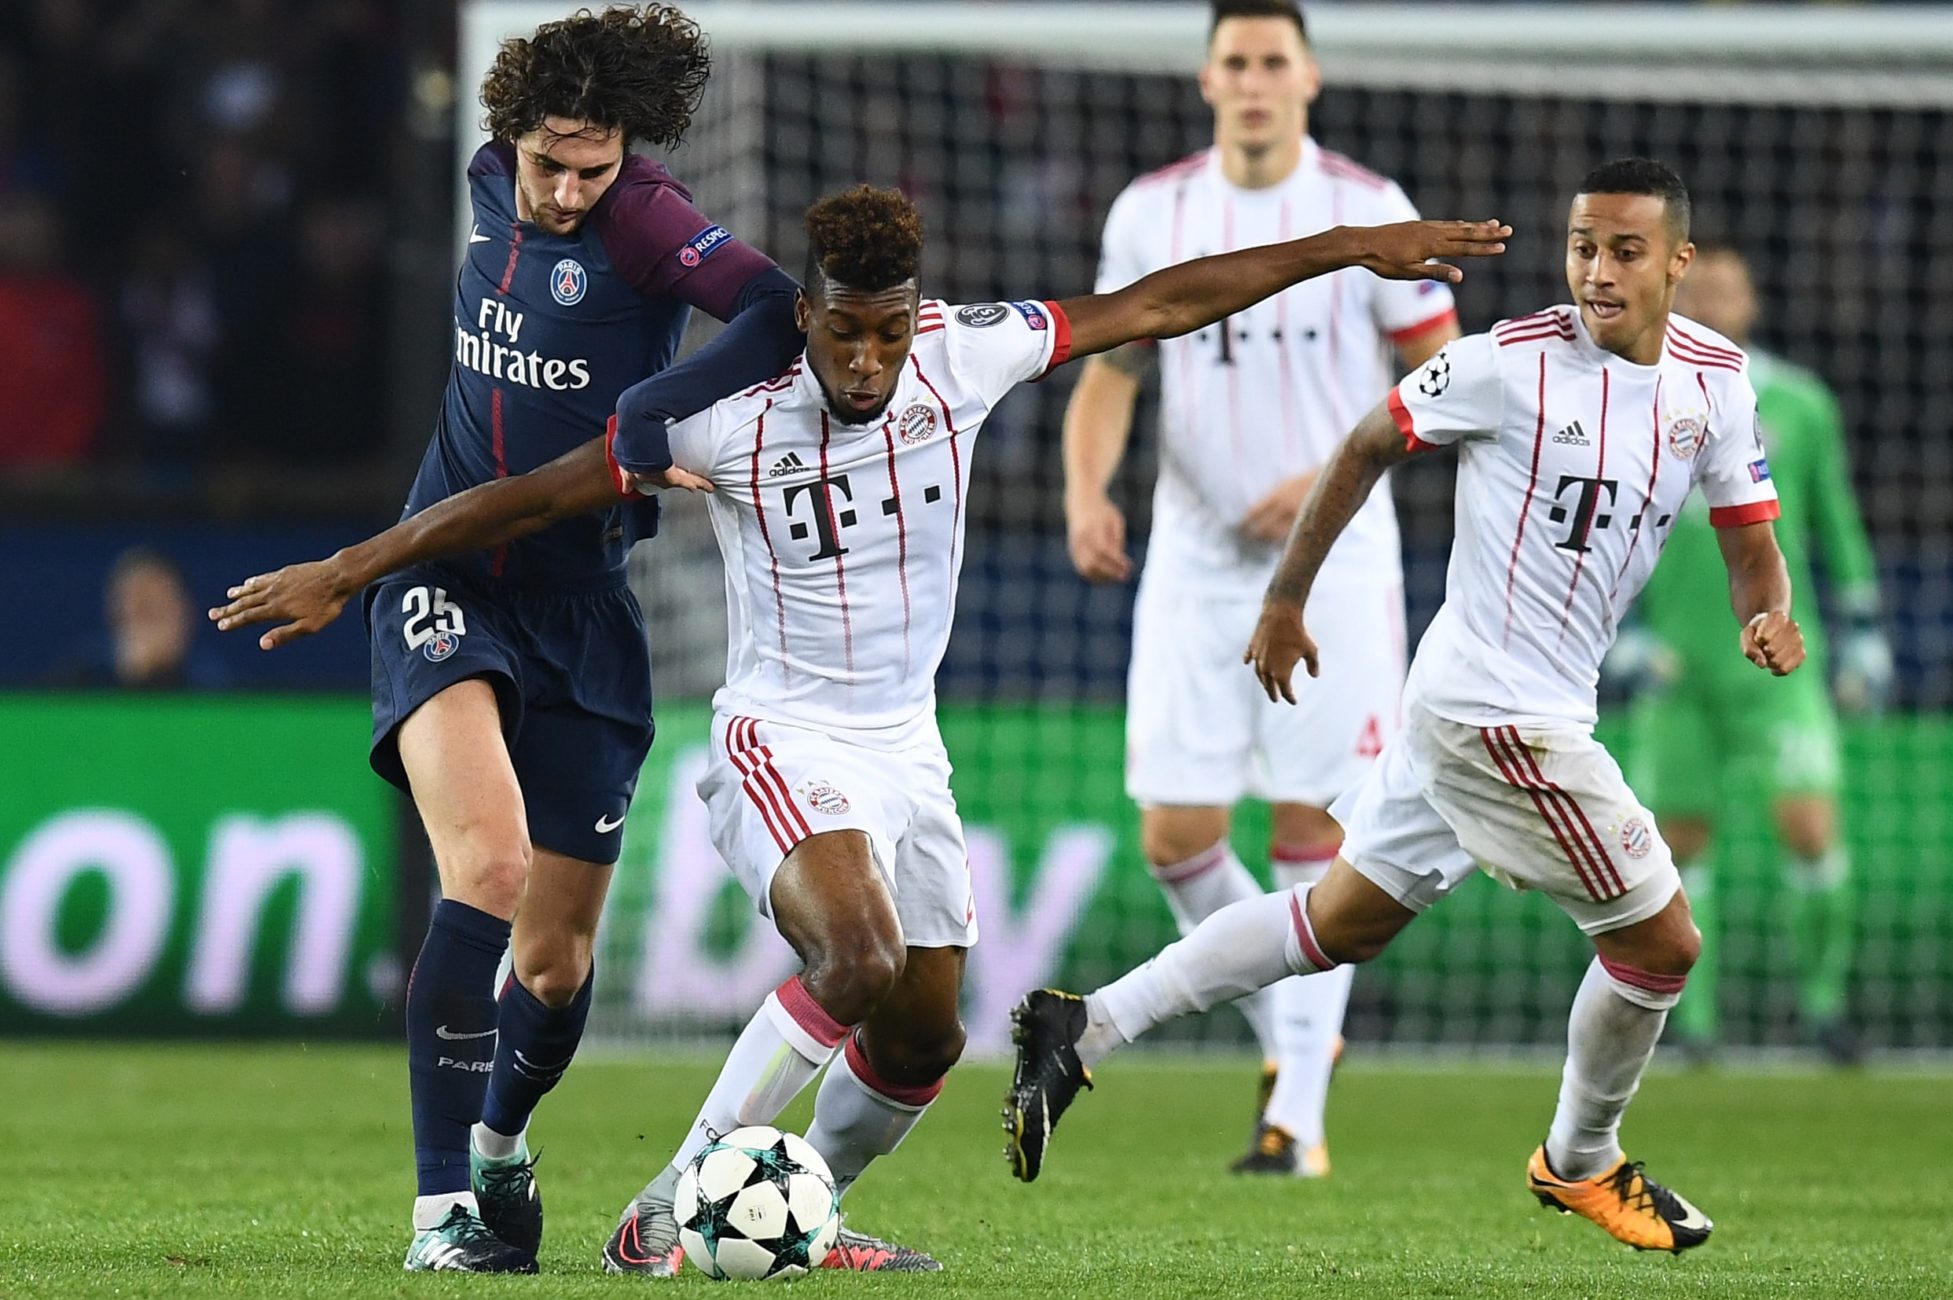 Young players like Coman and Süle got their chance. (Photo: FRANCK FIFE/AFP/Getty Images)